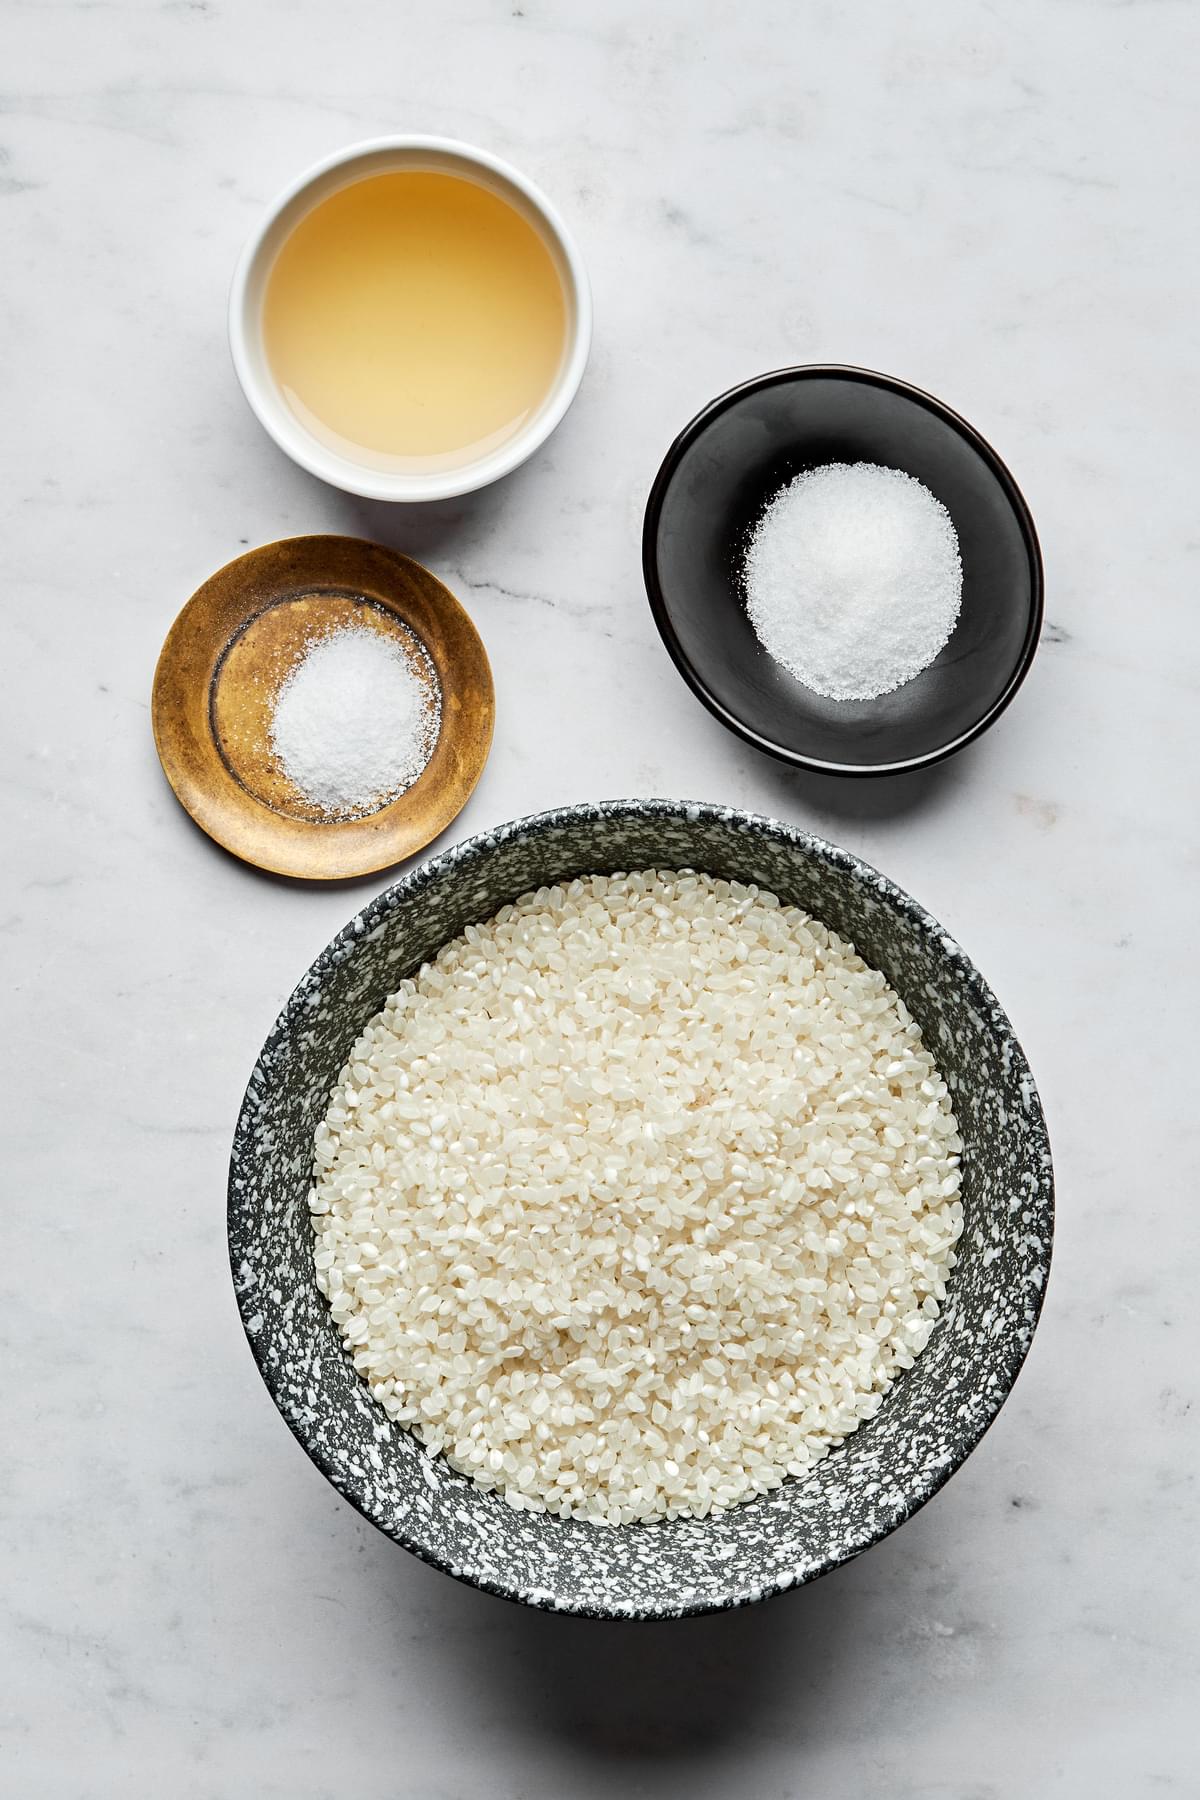 raw sushi rice, salt, unseasoned rice vinegar and sugar in bowls on the counter to make sushi rice